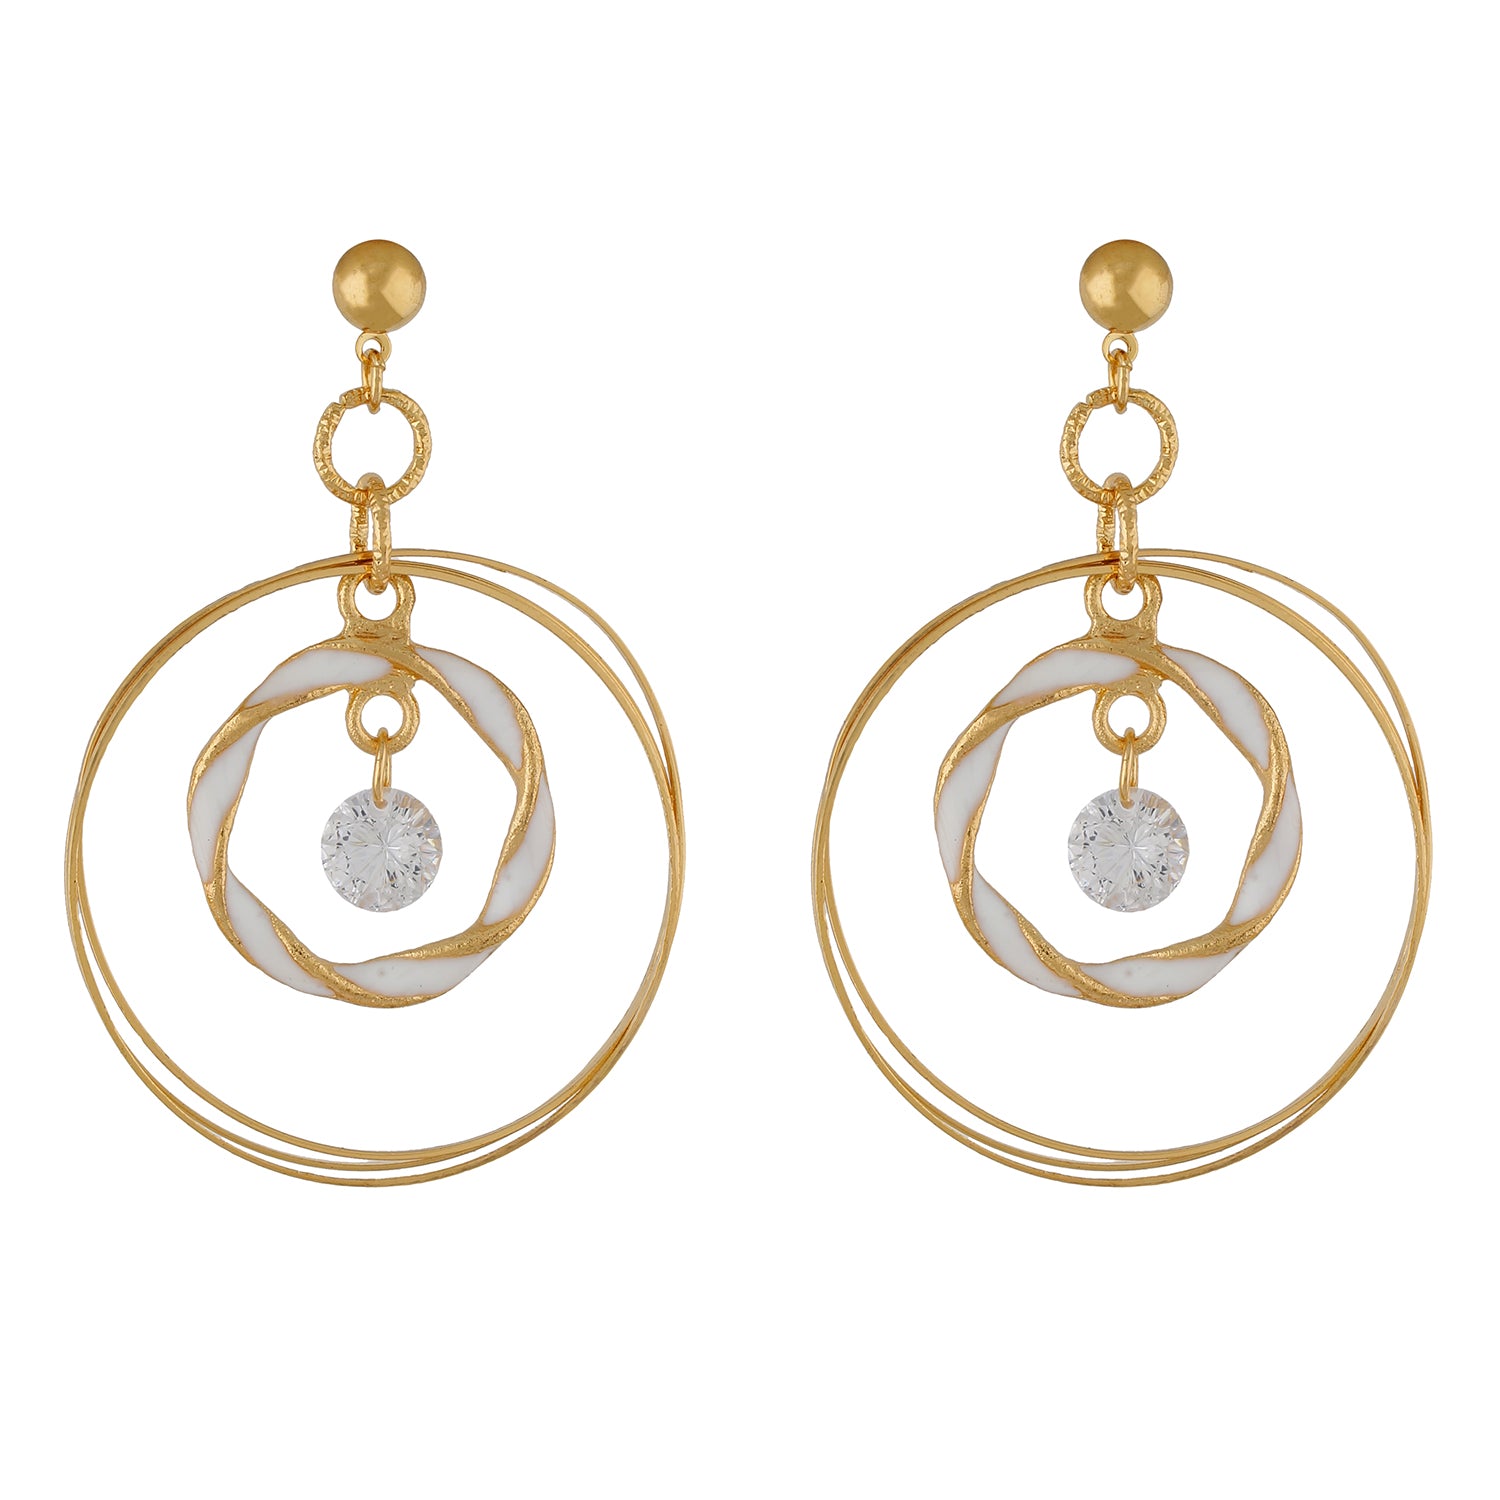 Remarkable White and Gold Colour Rings Design Earring for Girls and Women